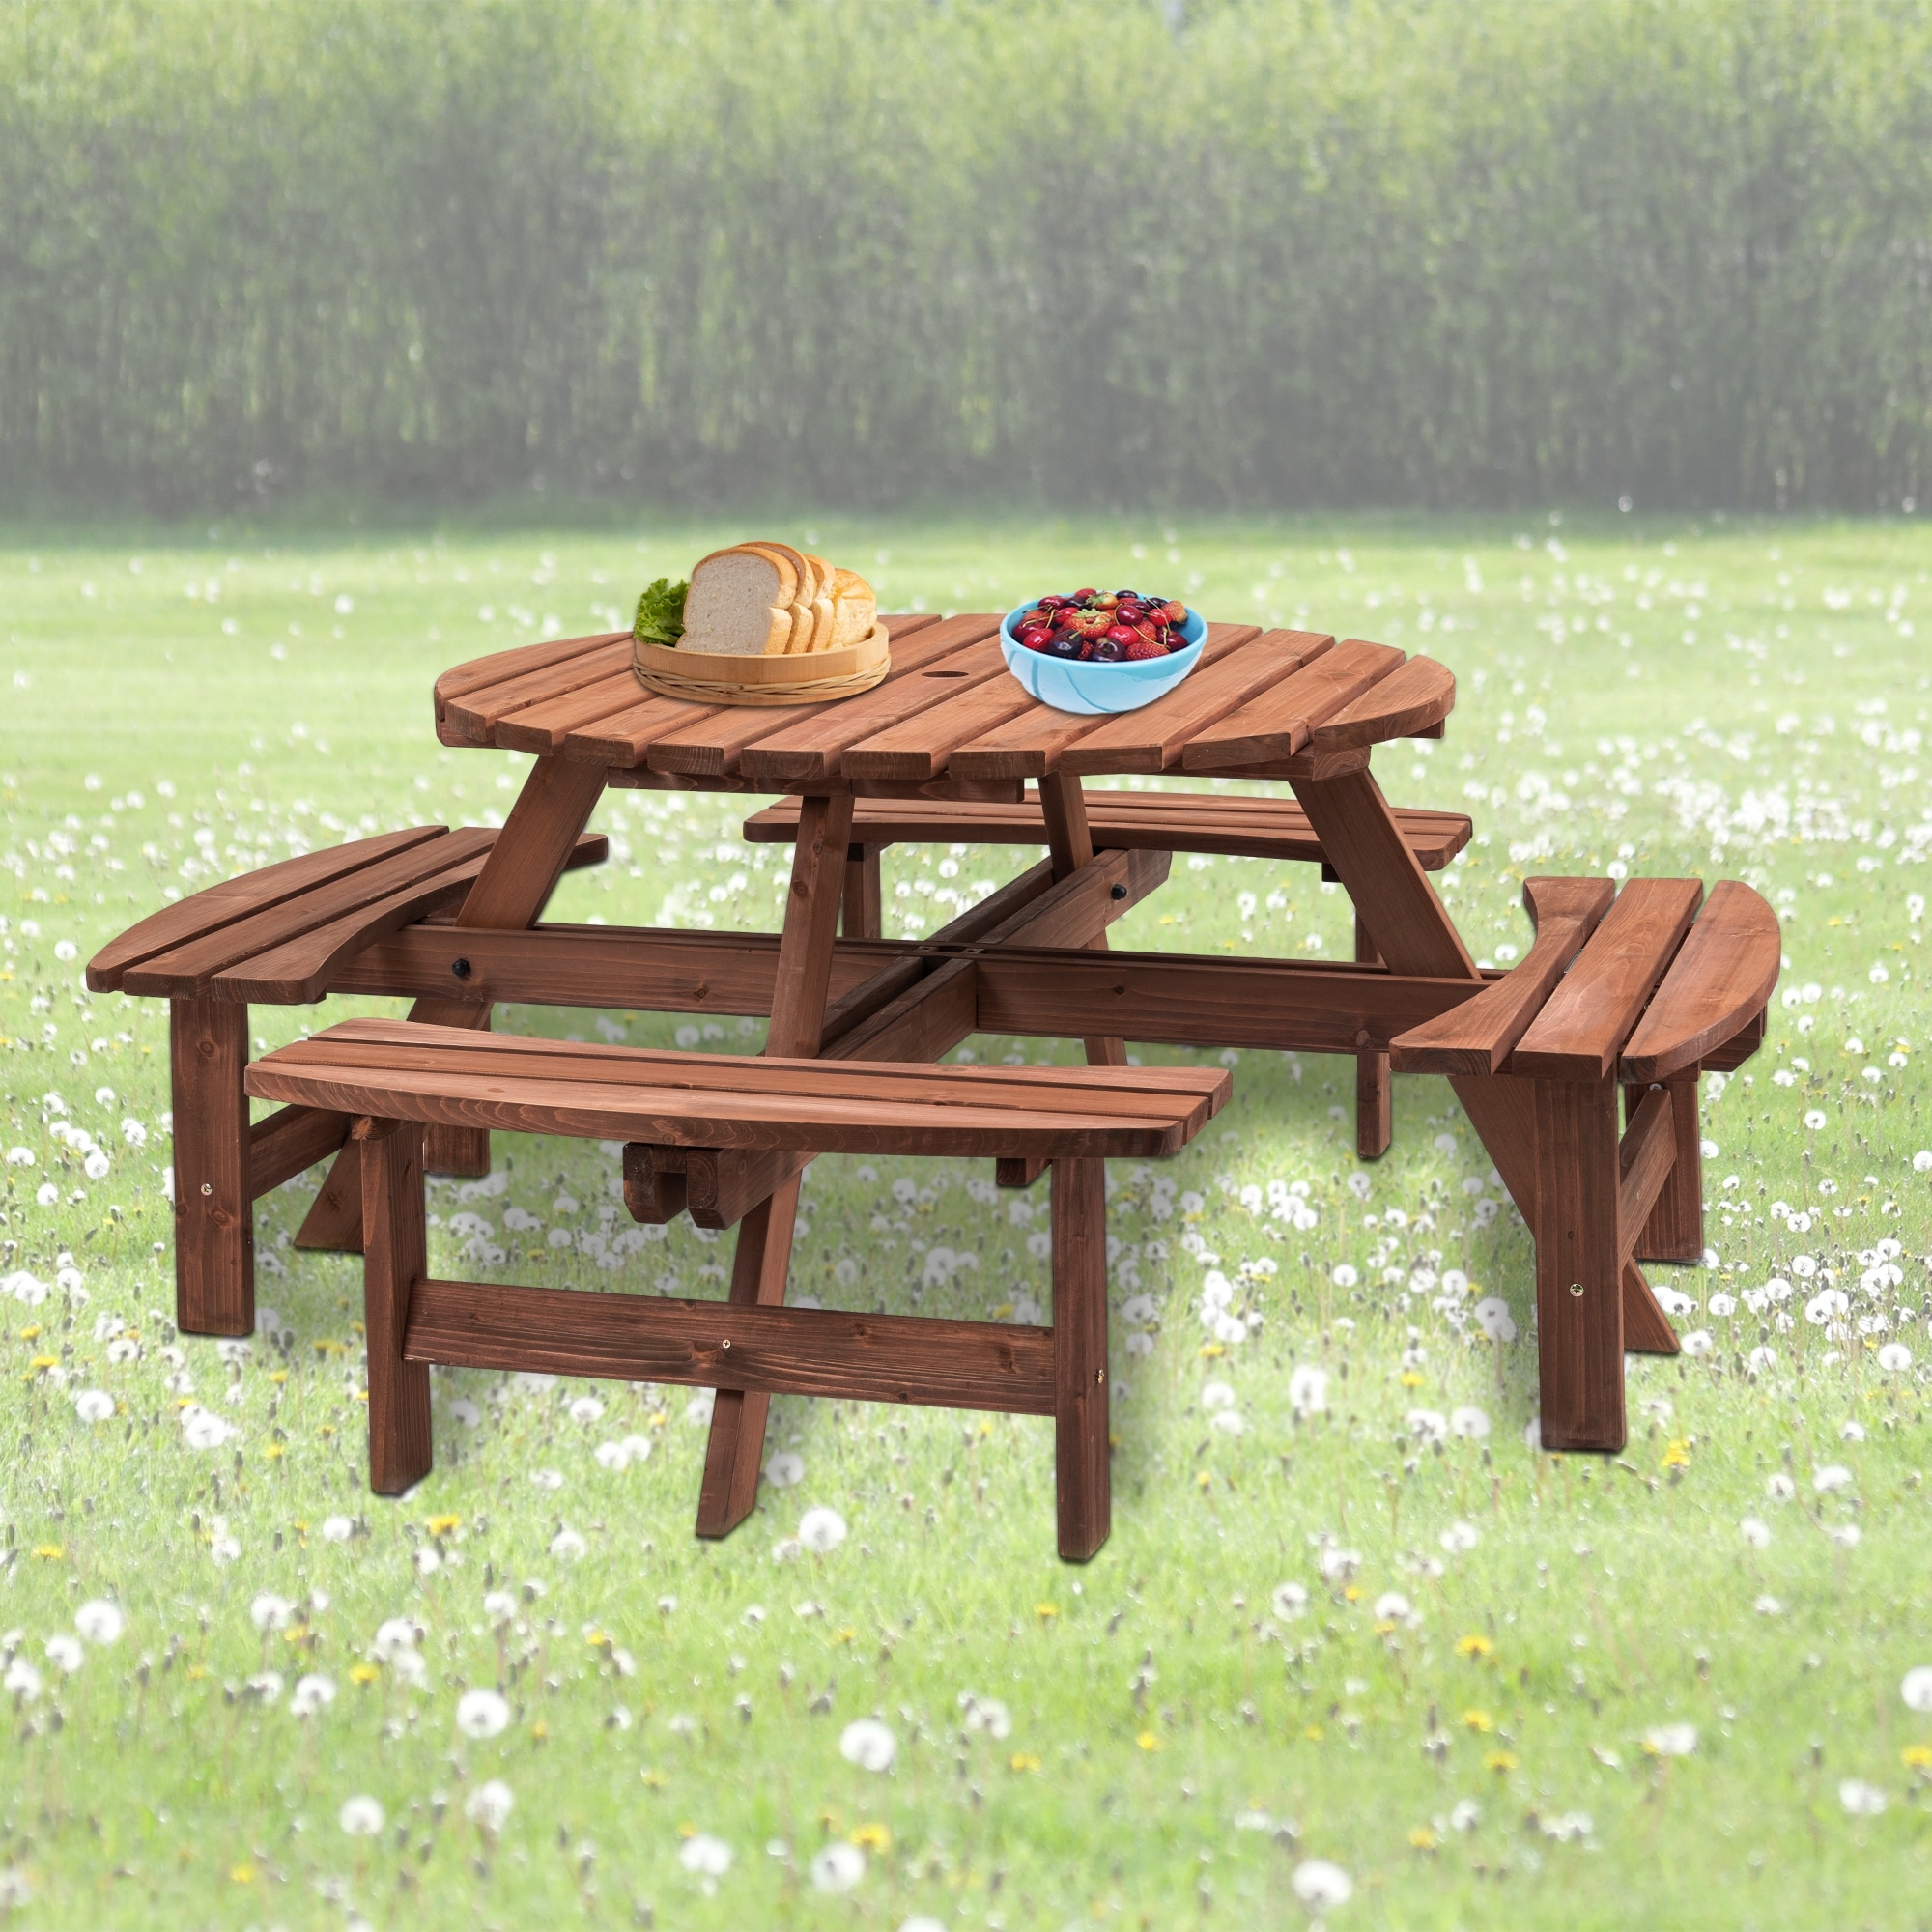 Outdoor Wooden Picnic Table With 4 Built-in Benches For 8-person